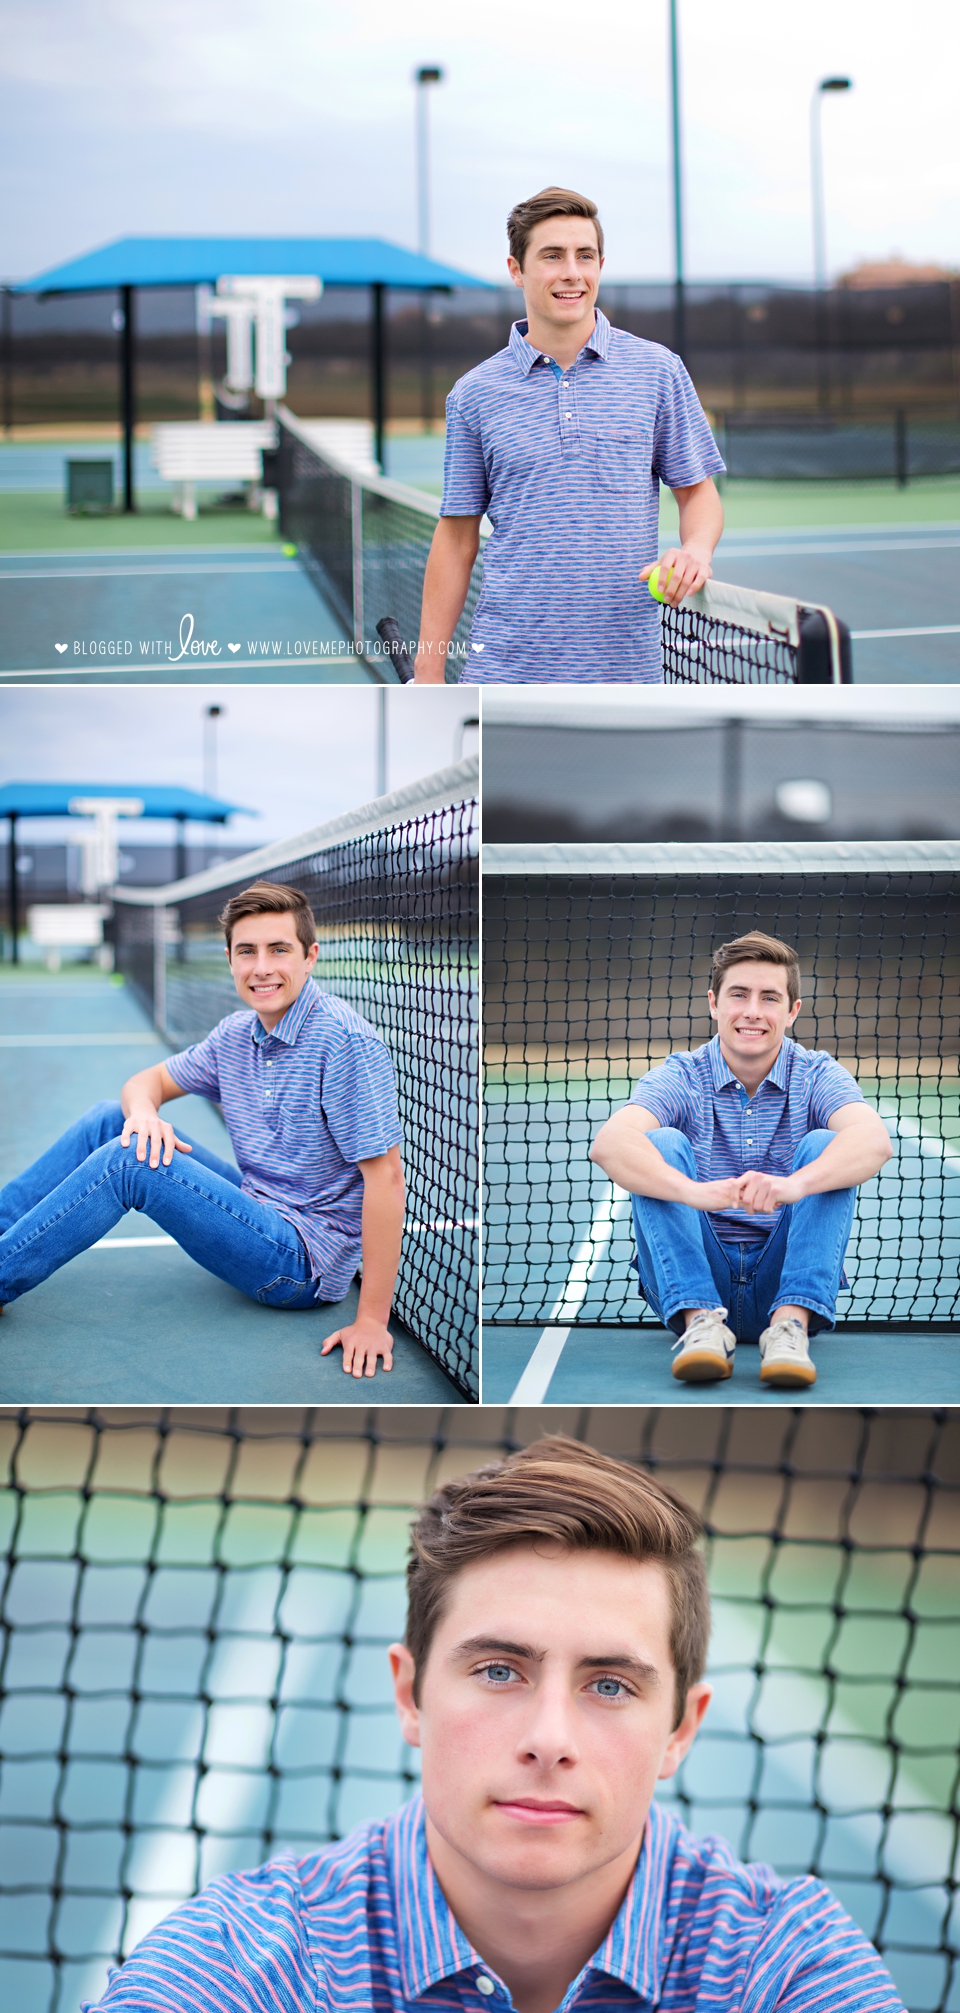 Photography of guy on tennis court